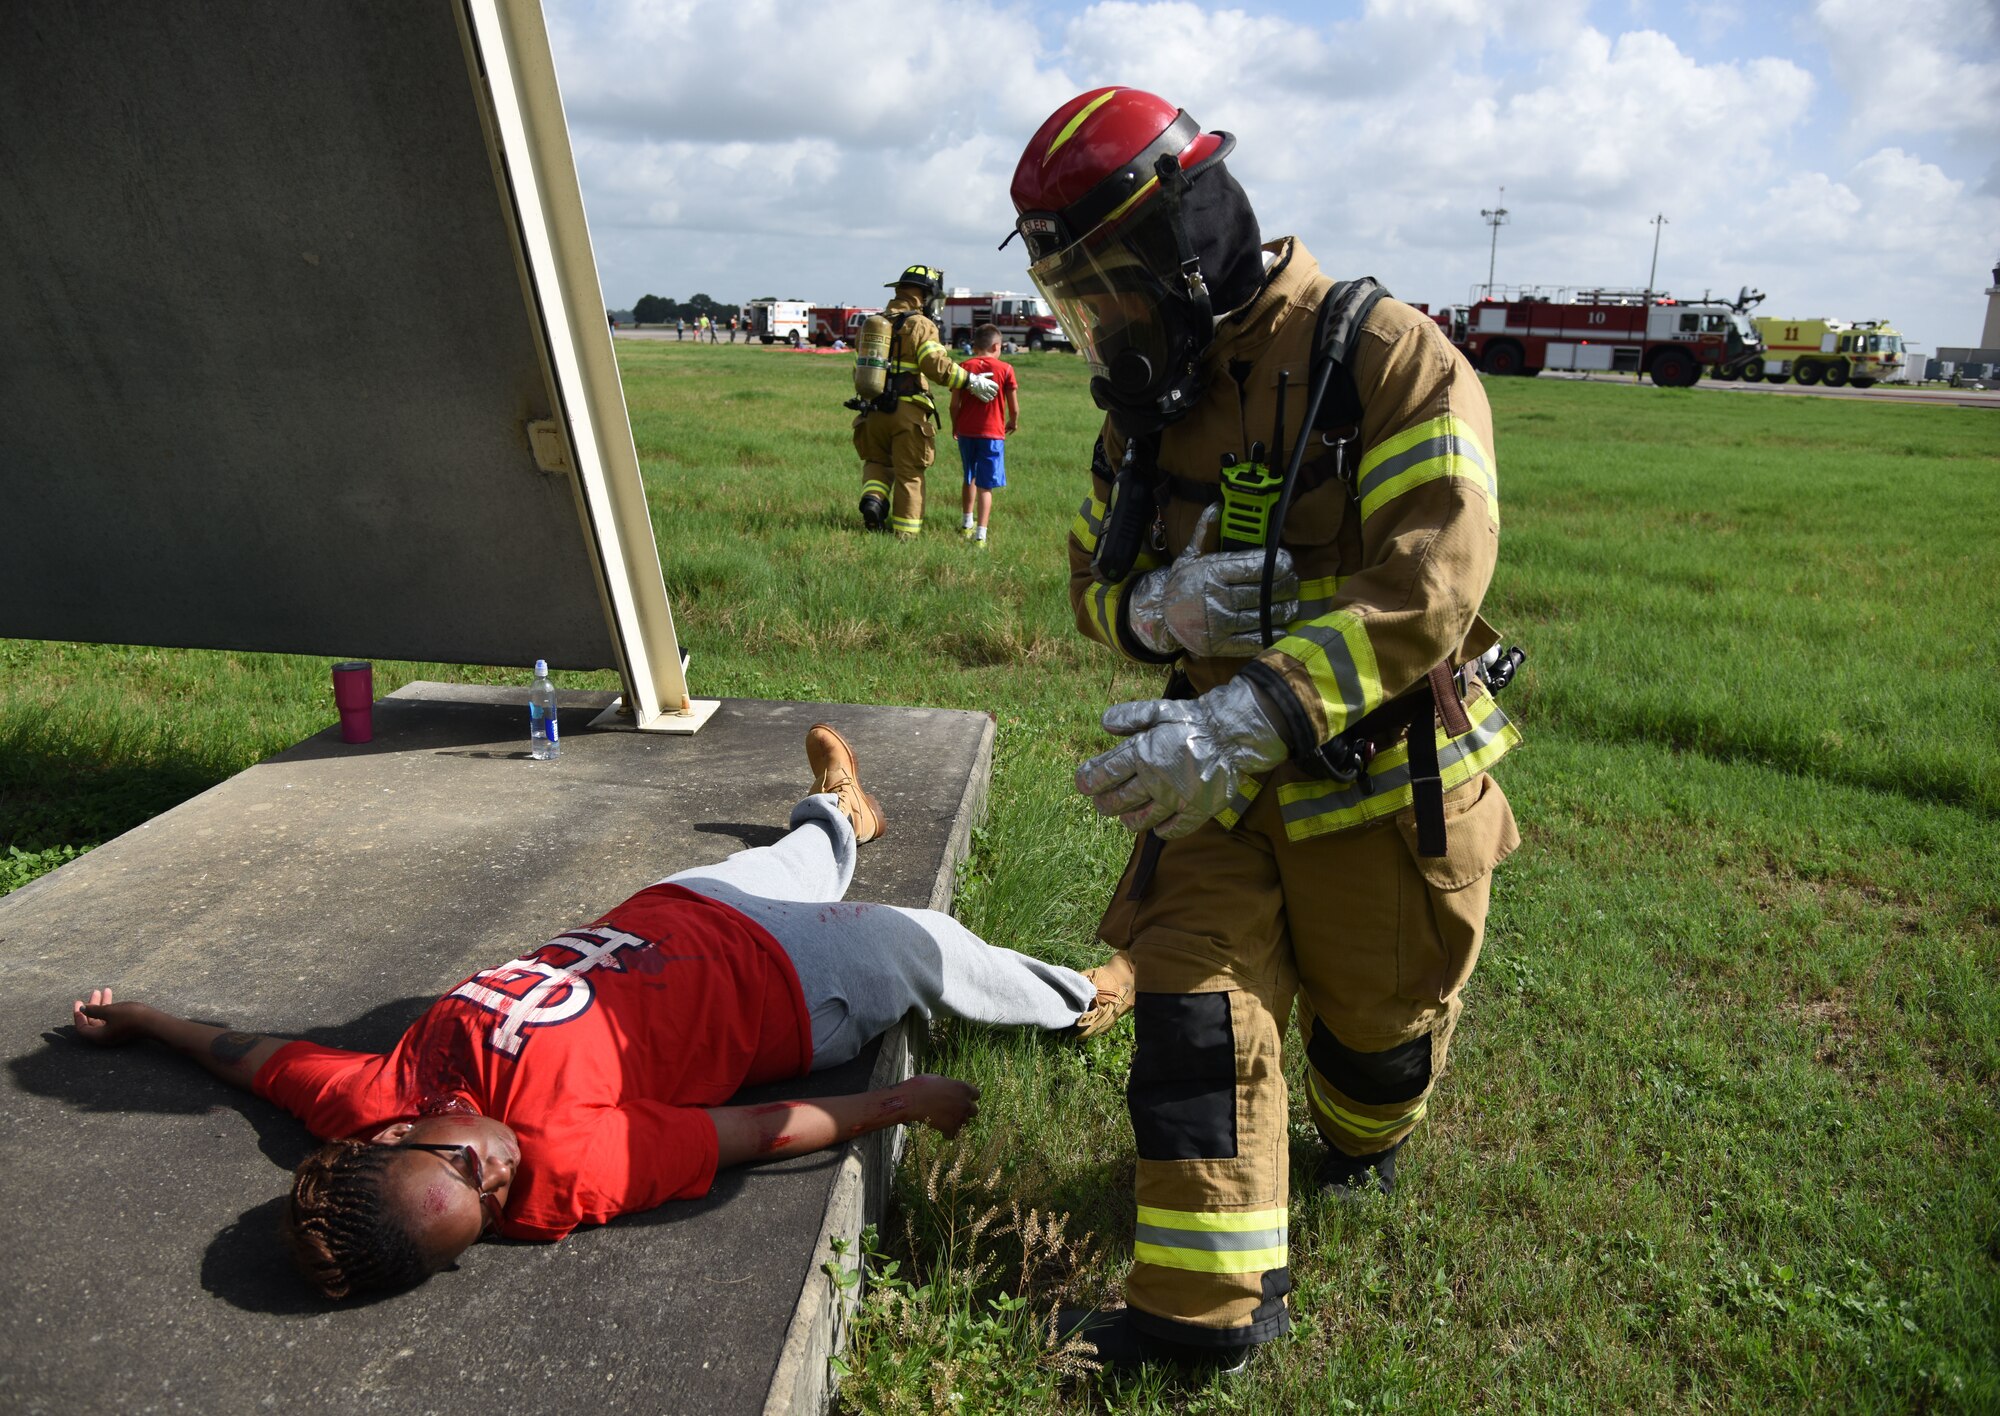 A Keesler Firefighter provides assistance to U.S. Air Force Tech. Sgt. Shanikqua Lucas, 81st Force Support Squadron manpower analyst, who portrays a “victim” during a major accident response exercise on the flight line at Keesler Air Force Base, Mississippi, June 21, 2018. The exercise scenario simulated a C-130J Super Hercules in-flight emergency causing a plane crash, which resulted in a mass casualty response event. This exercise tested the base’s ability to respond in a crisis situation. (U.S. Air Force photo by Kemberly Groue)